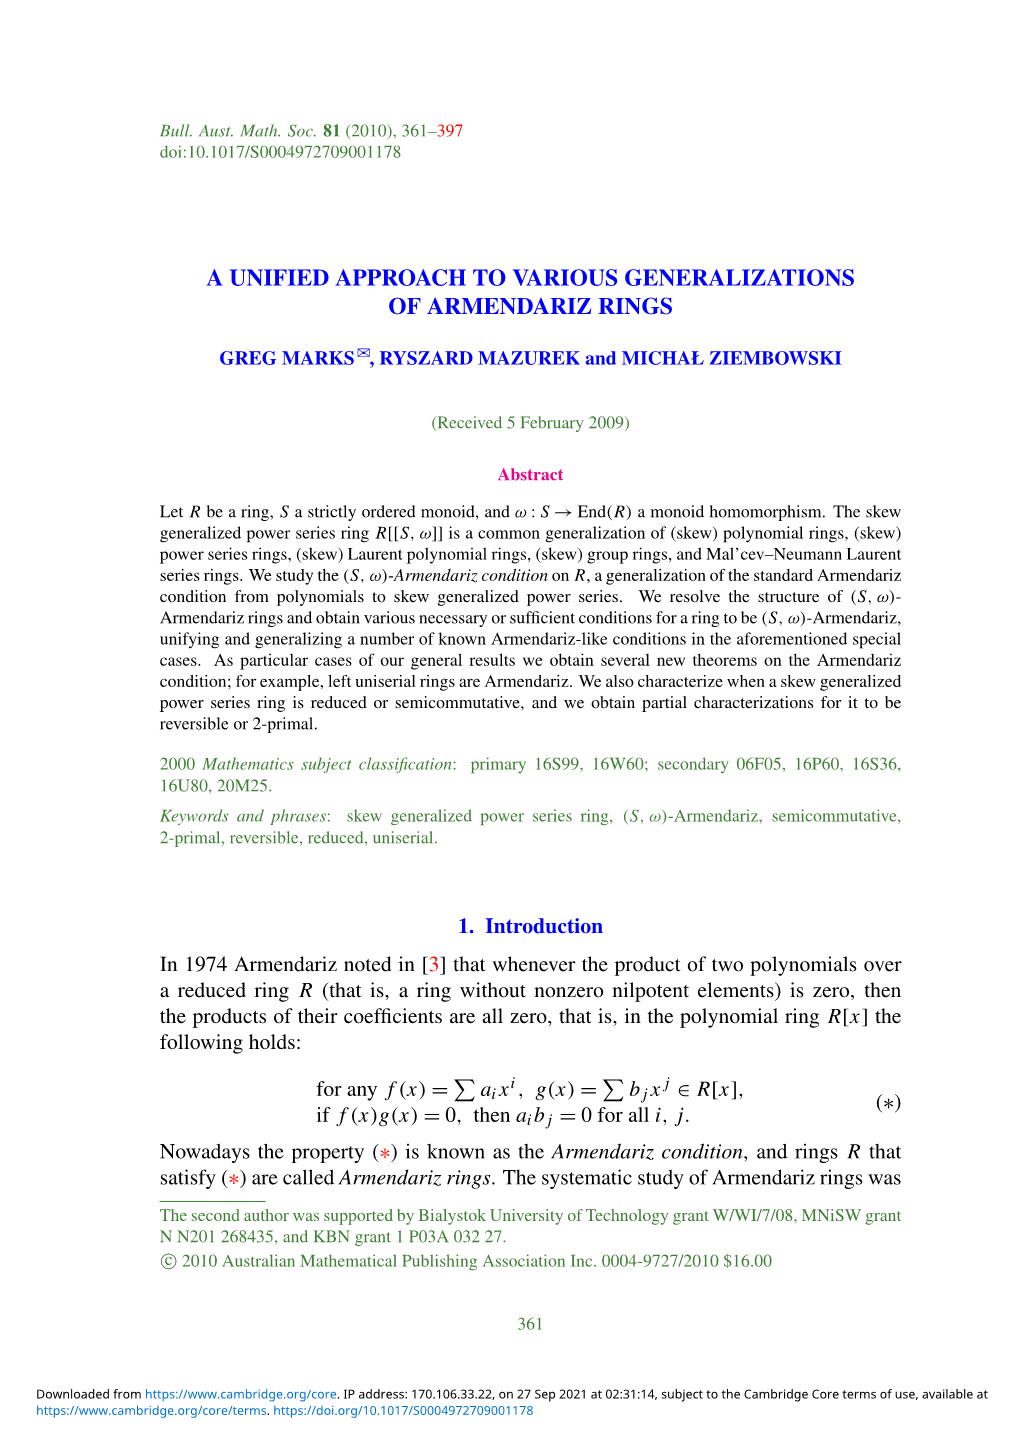 A Unified Approach to Various Generalizations of Armendariz Rings